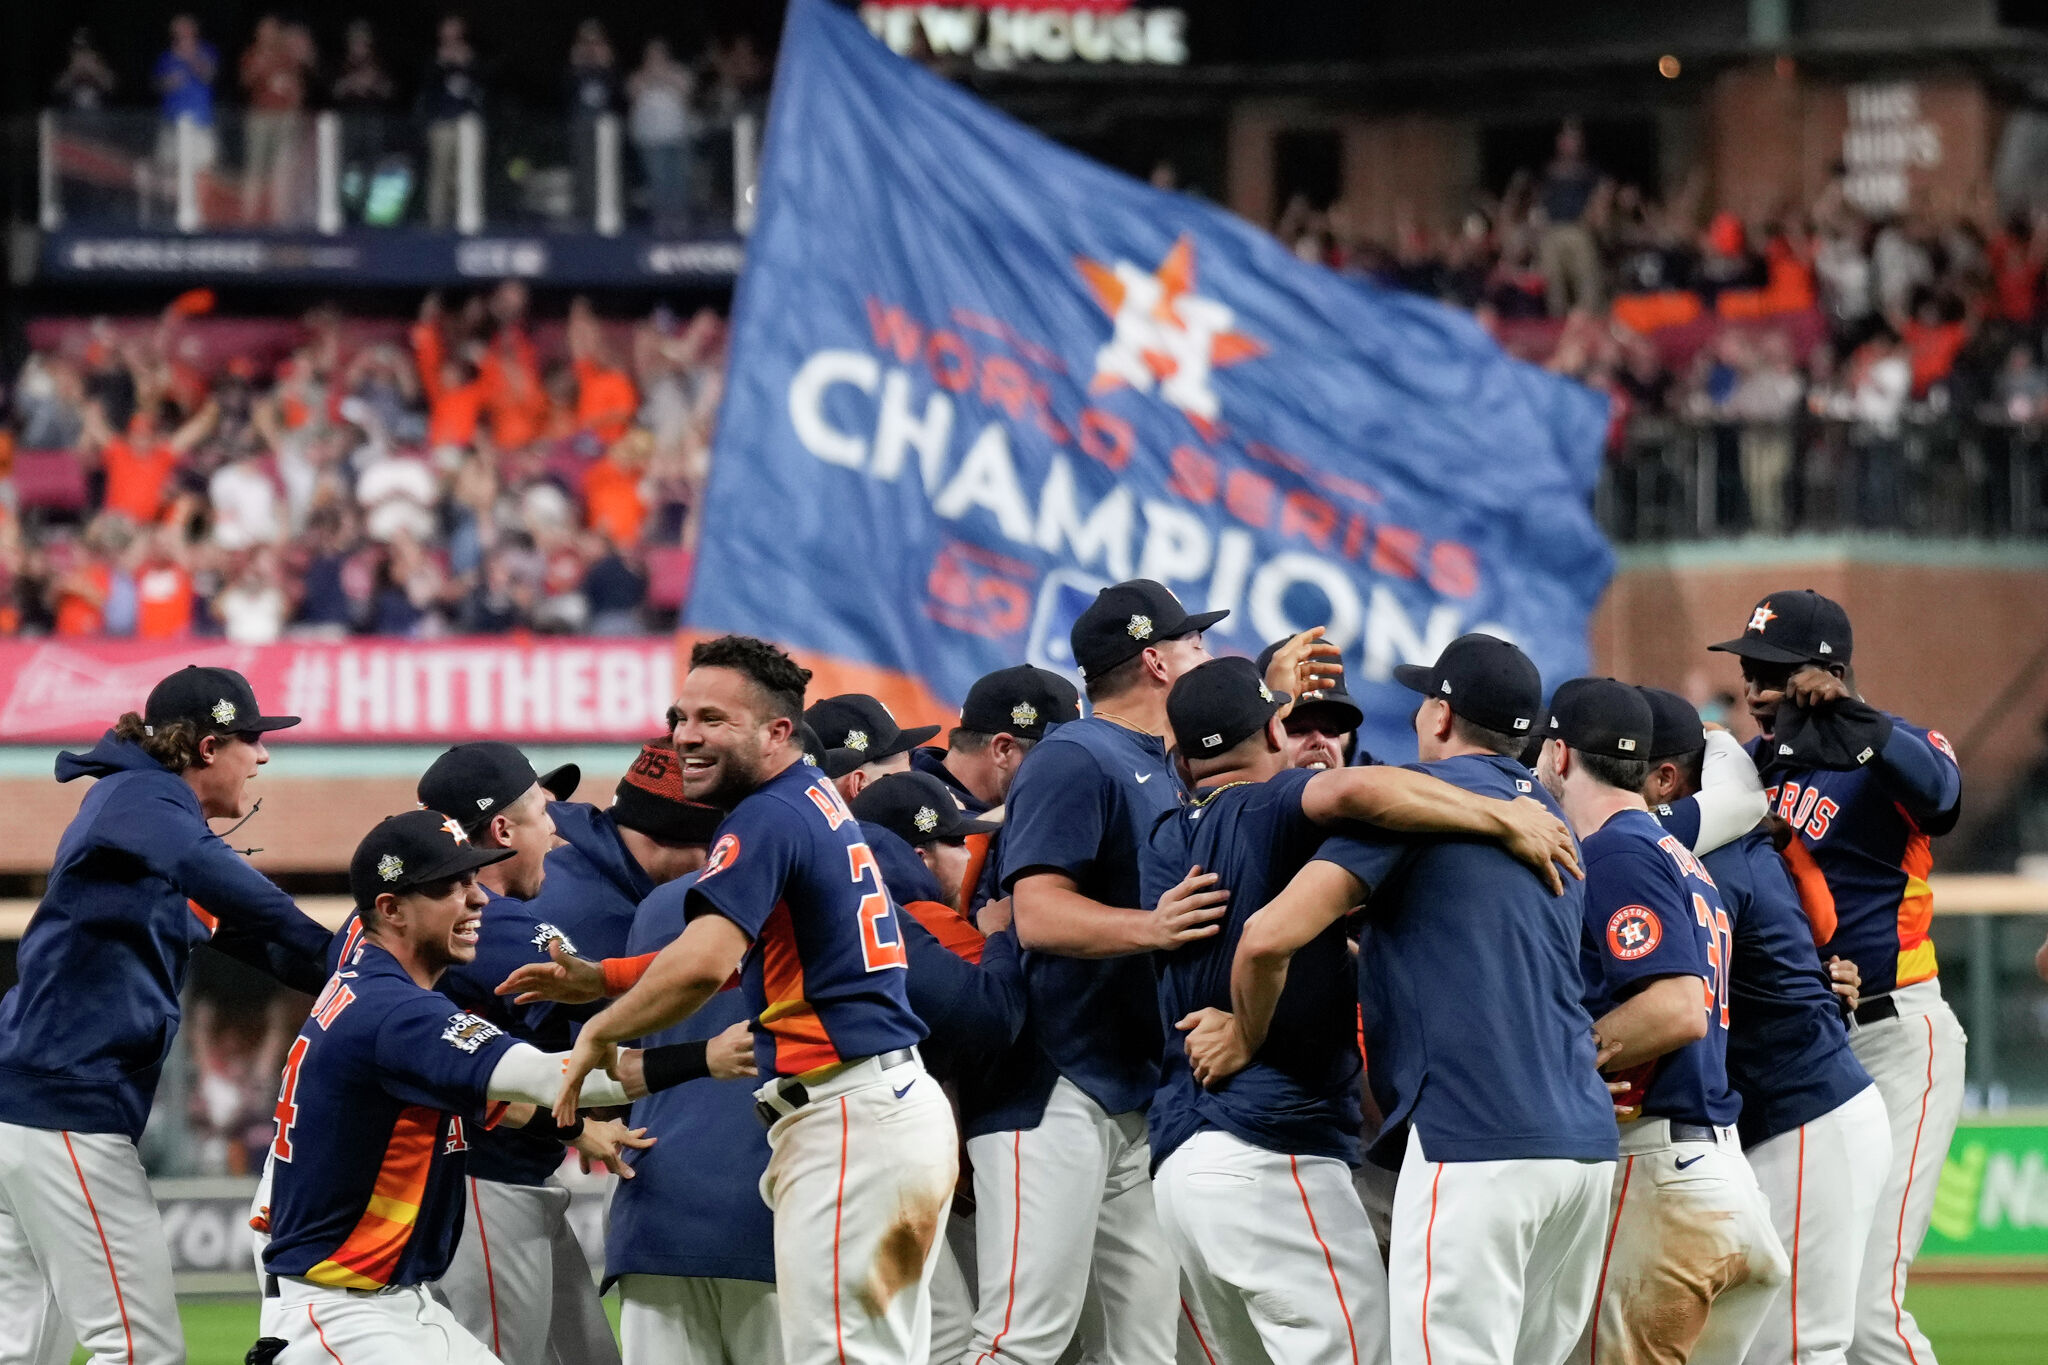 MLB playoff schedule: Dates for Astros fans to circle on calendar